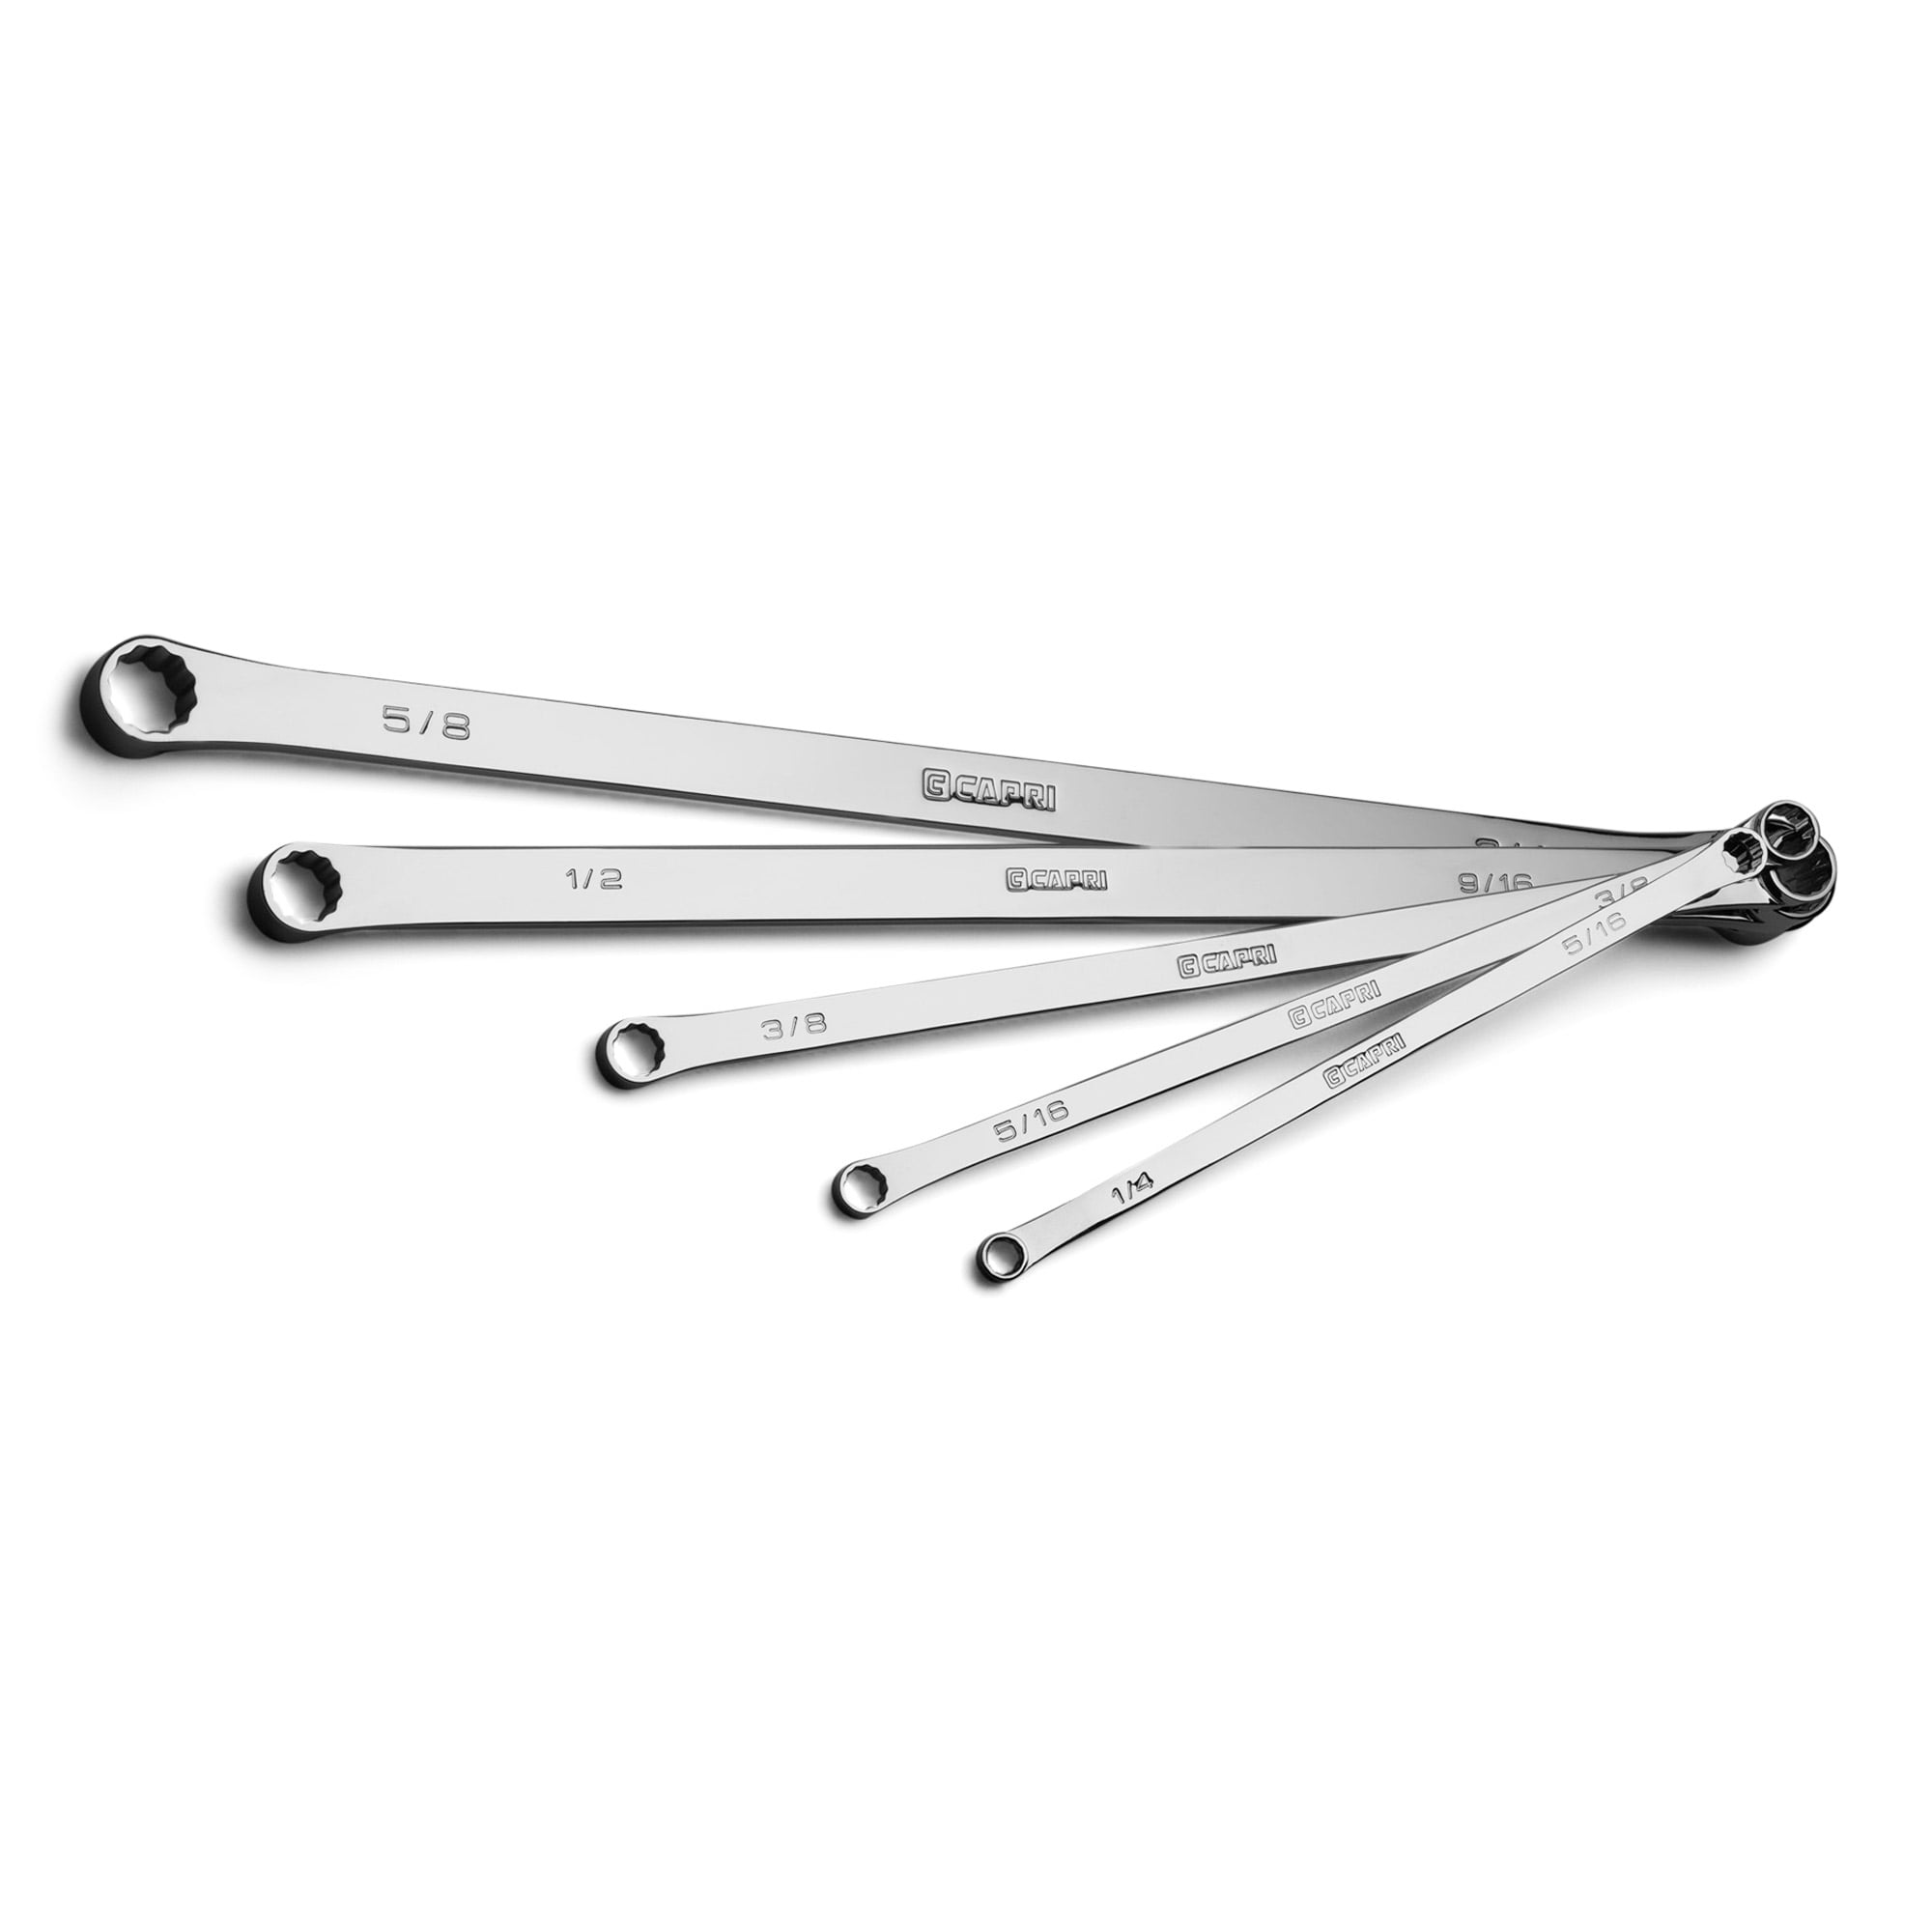 Capri Tools 0 Degree Offset Extra Long Box End Wrench Set, SAE, 1/4-3/4  in., 8 Sizes, 5 Piece